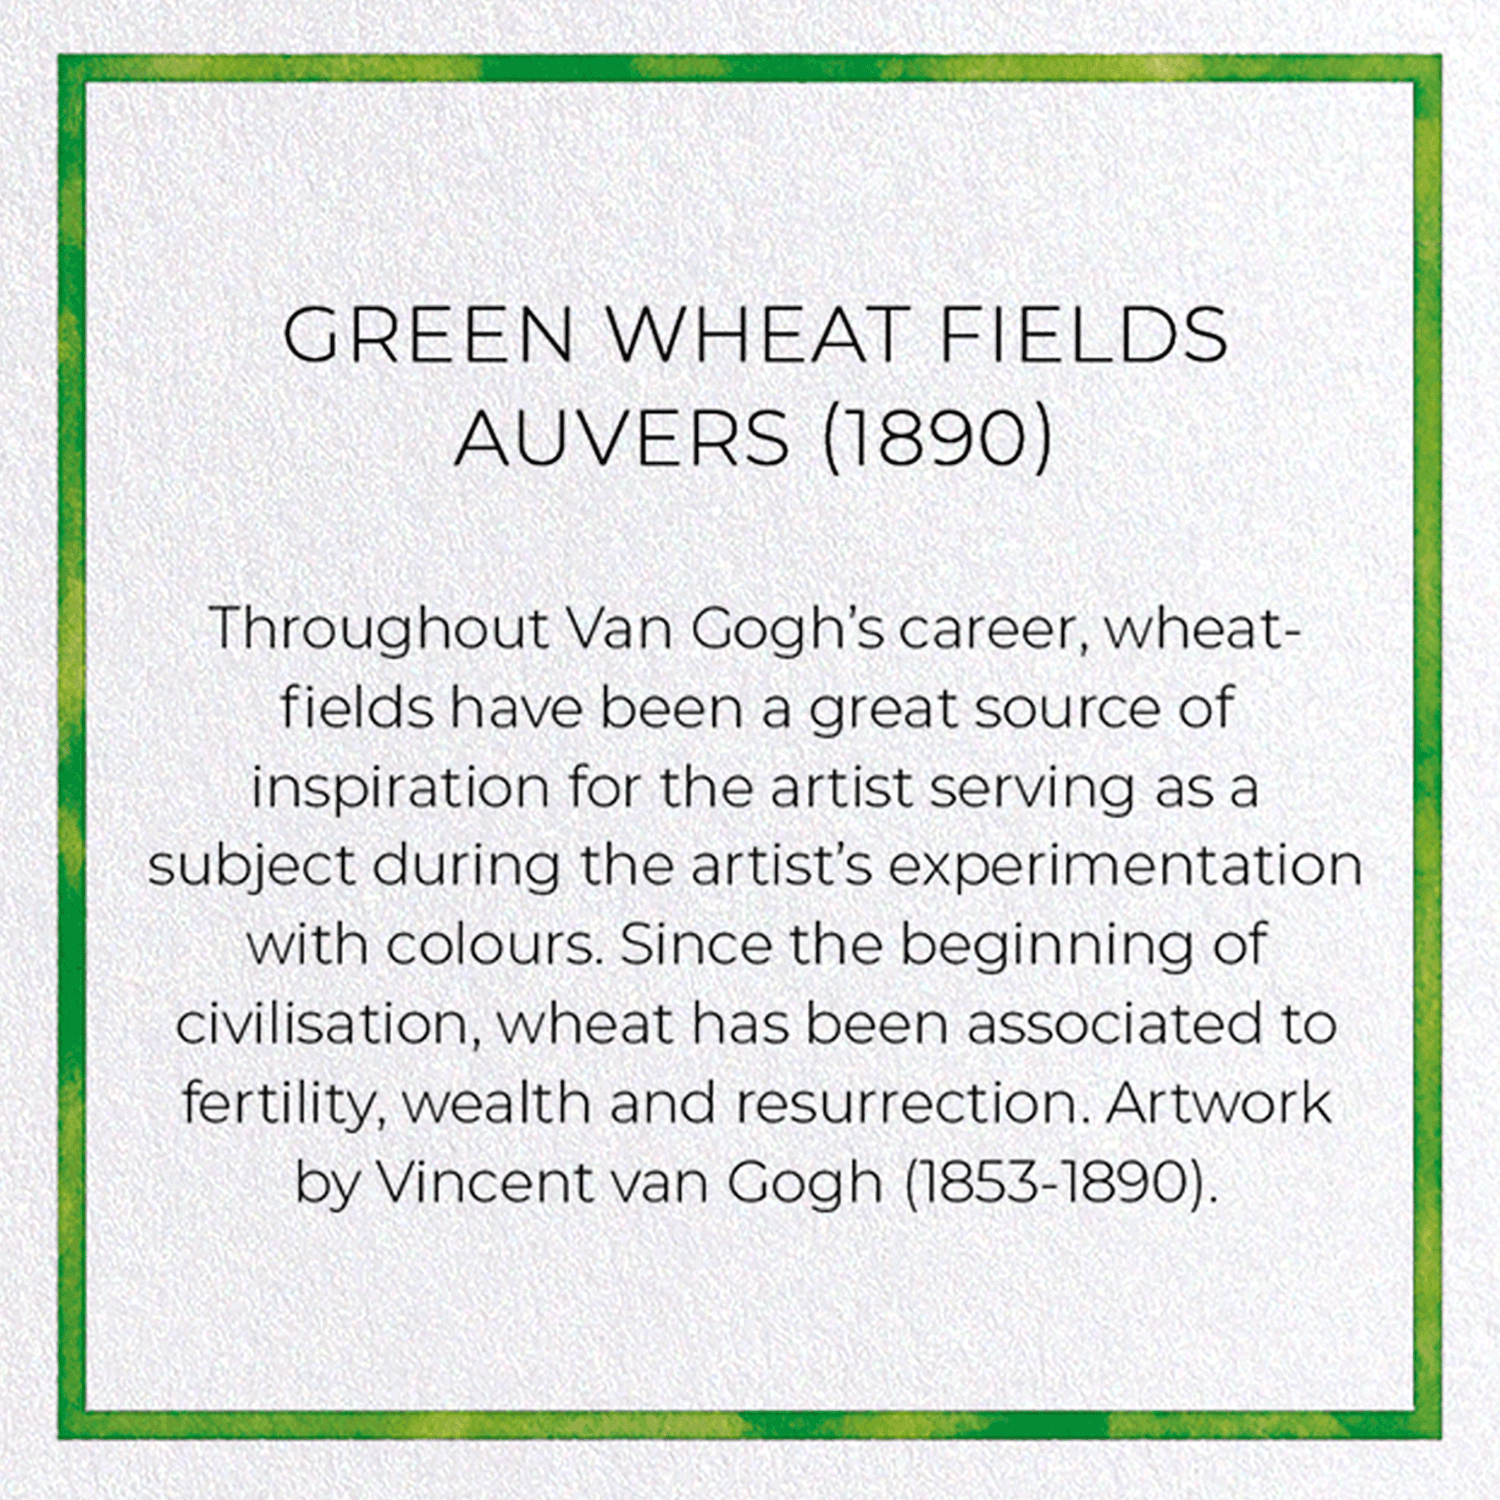 GREEN WHEAT FIELDS AUVERS (1890): Painting Greeting Card